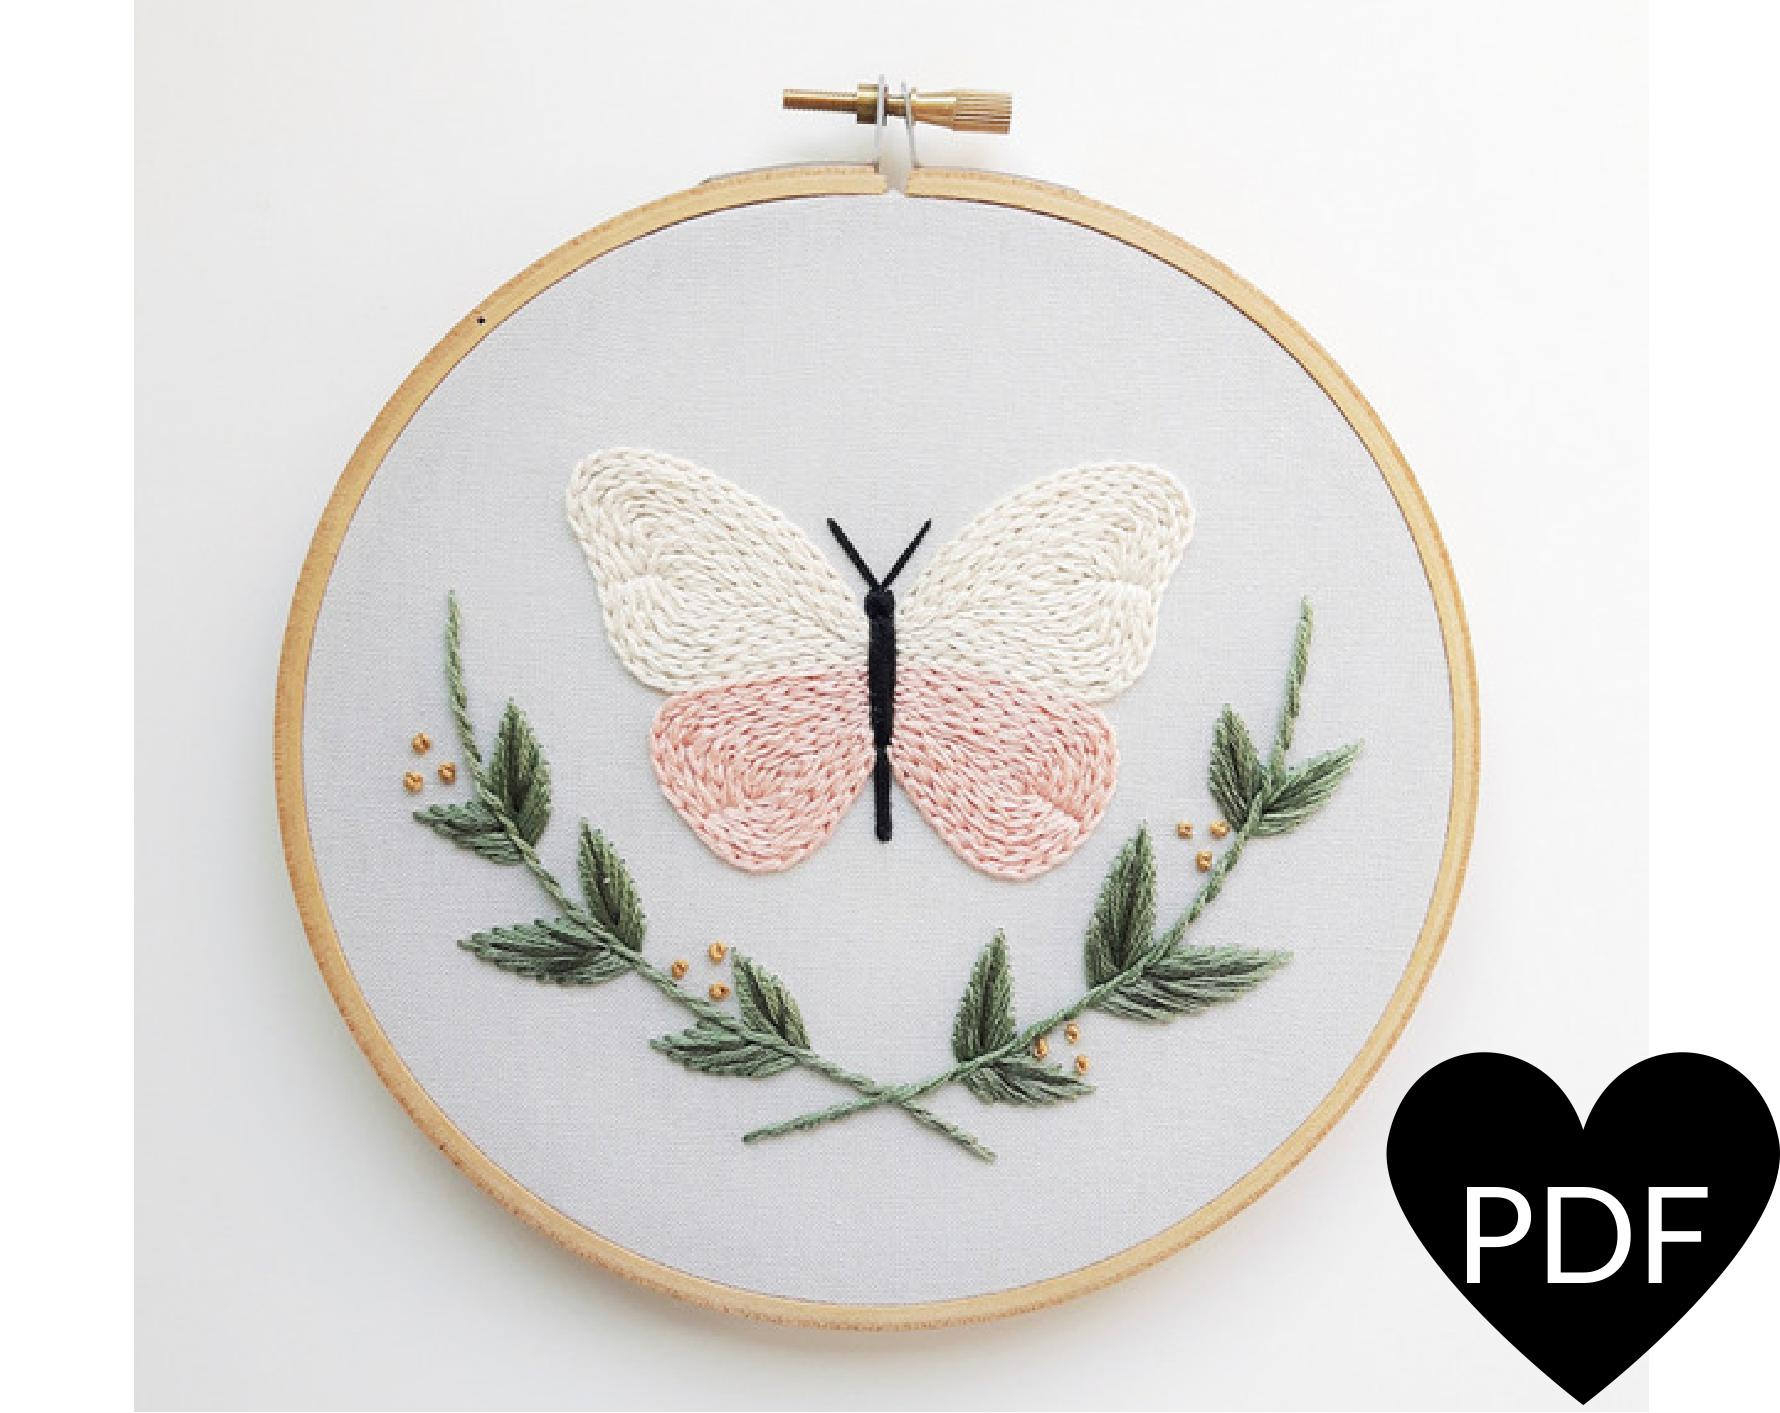 Butterfly Embroidery Pattern Butterfly Embroidery Pattern Pdf Pattern Nature Inspired Craft Hand Embroidery Pattern Instant Download Pdf Printable Pattern Diy Gift